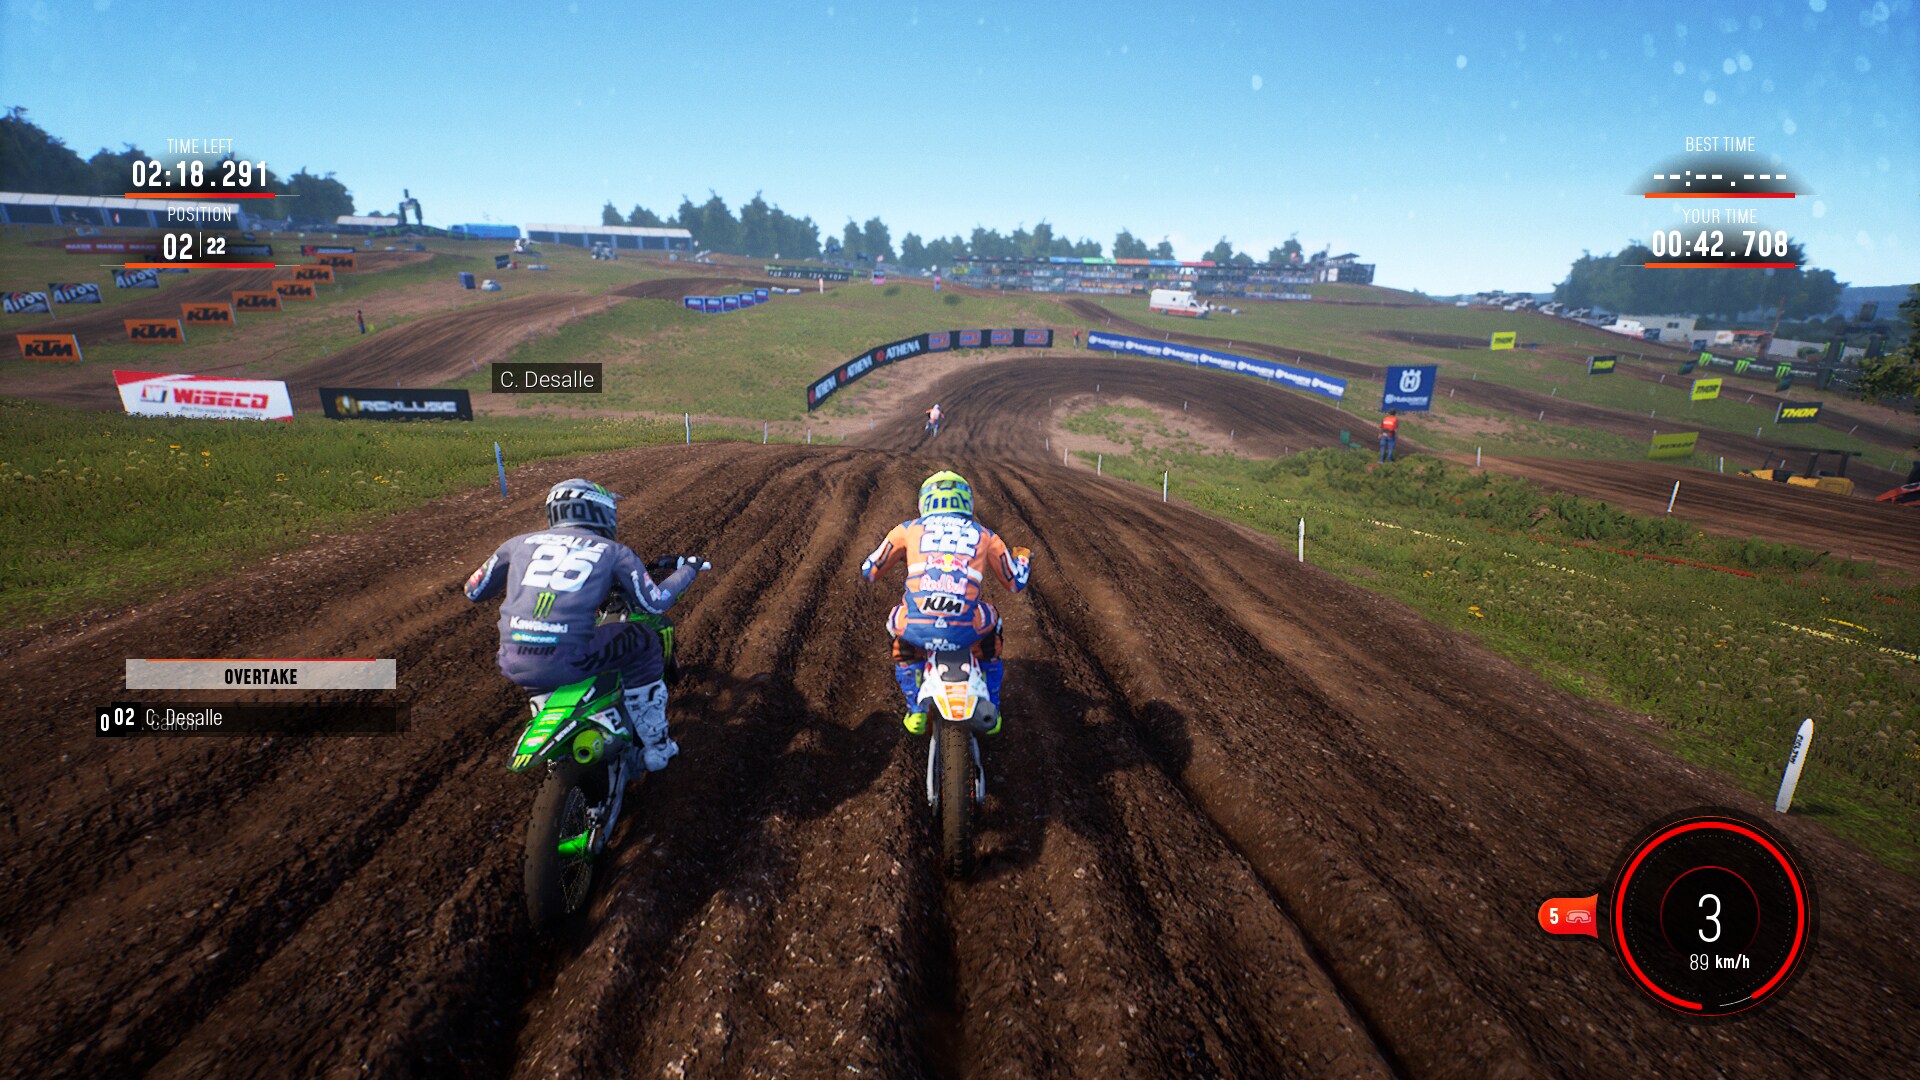 MXGP 2019 - The Official Motocross Videogame Steam Key GLOBAL - 2